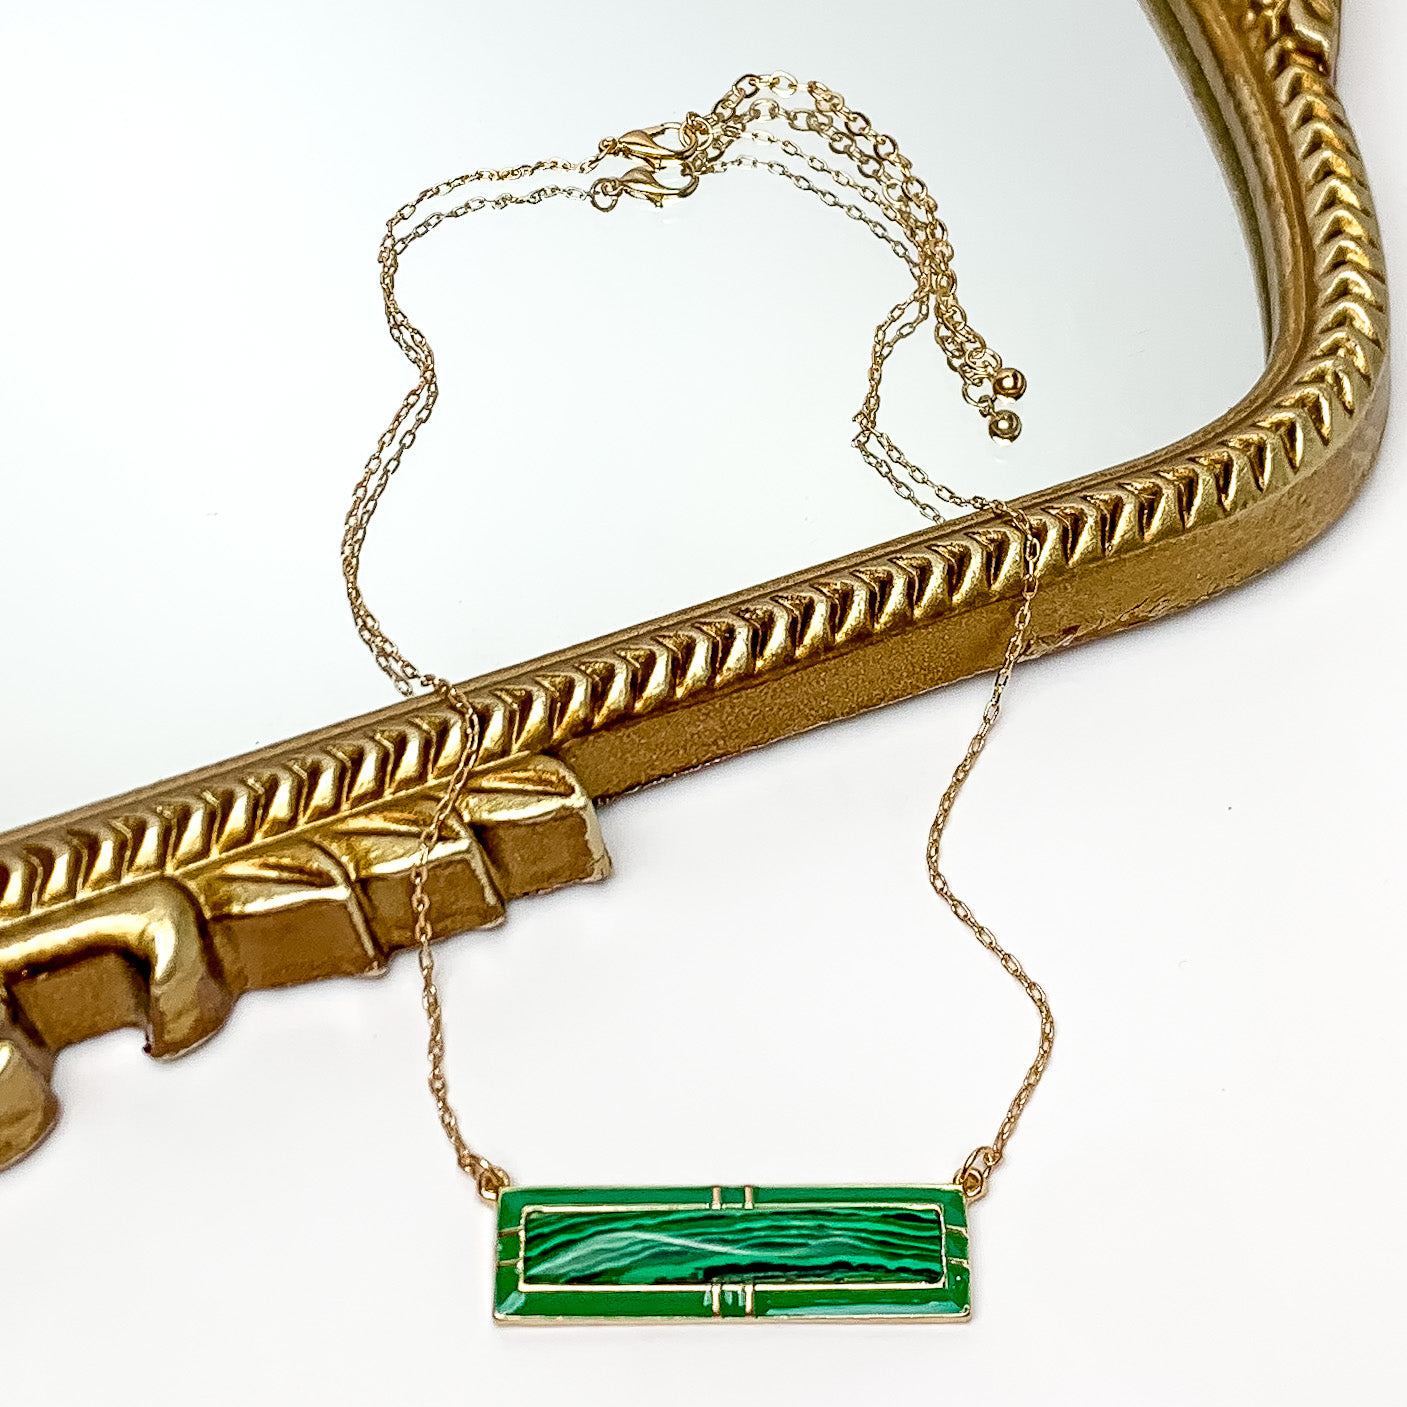 Everyday Gold Tone Chain Necklace With Rectangular Pendant in Kelly Green - Giddy Up Glamour Boutique